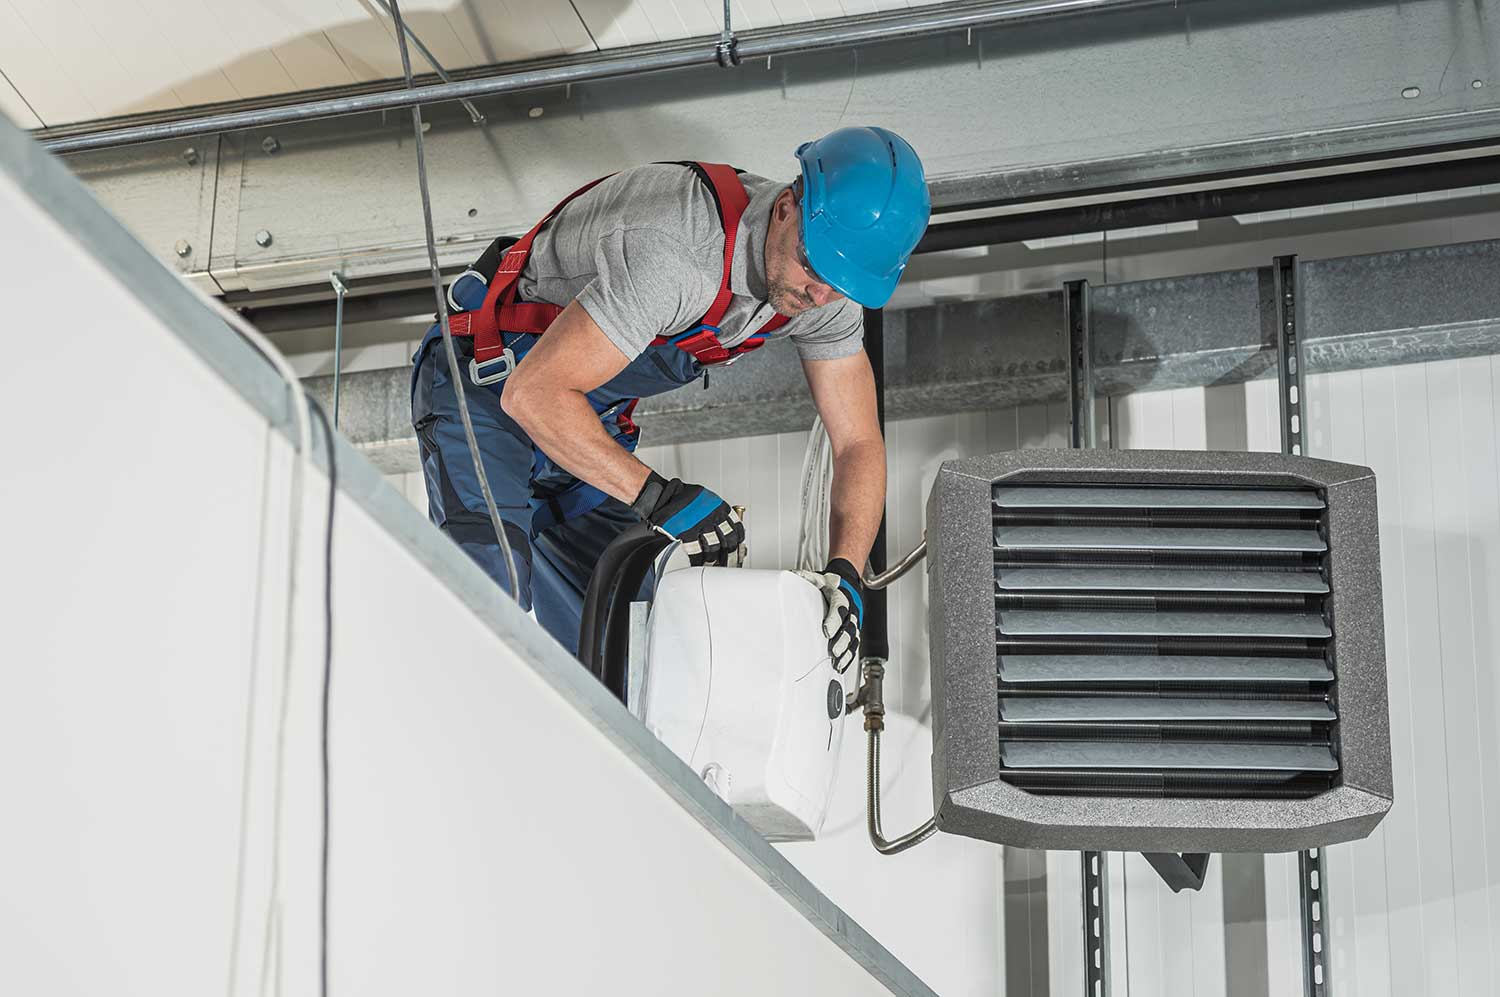 Cleaning the HVAC duct system